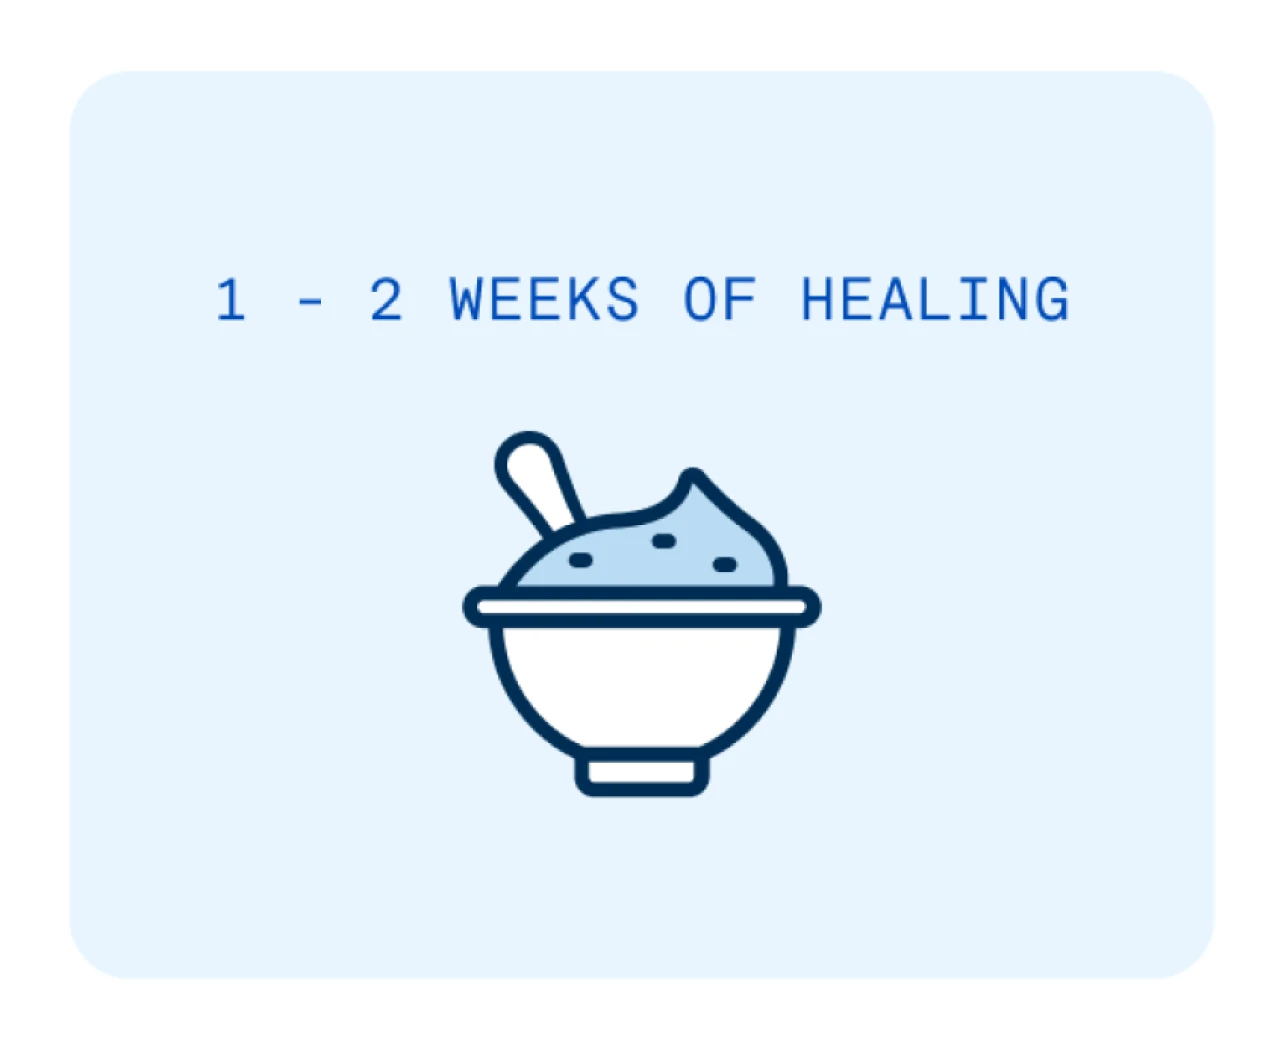 Soft foods only - 1 to 2 weeks of healing. 